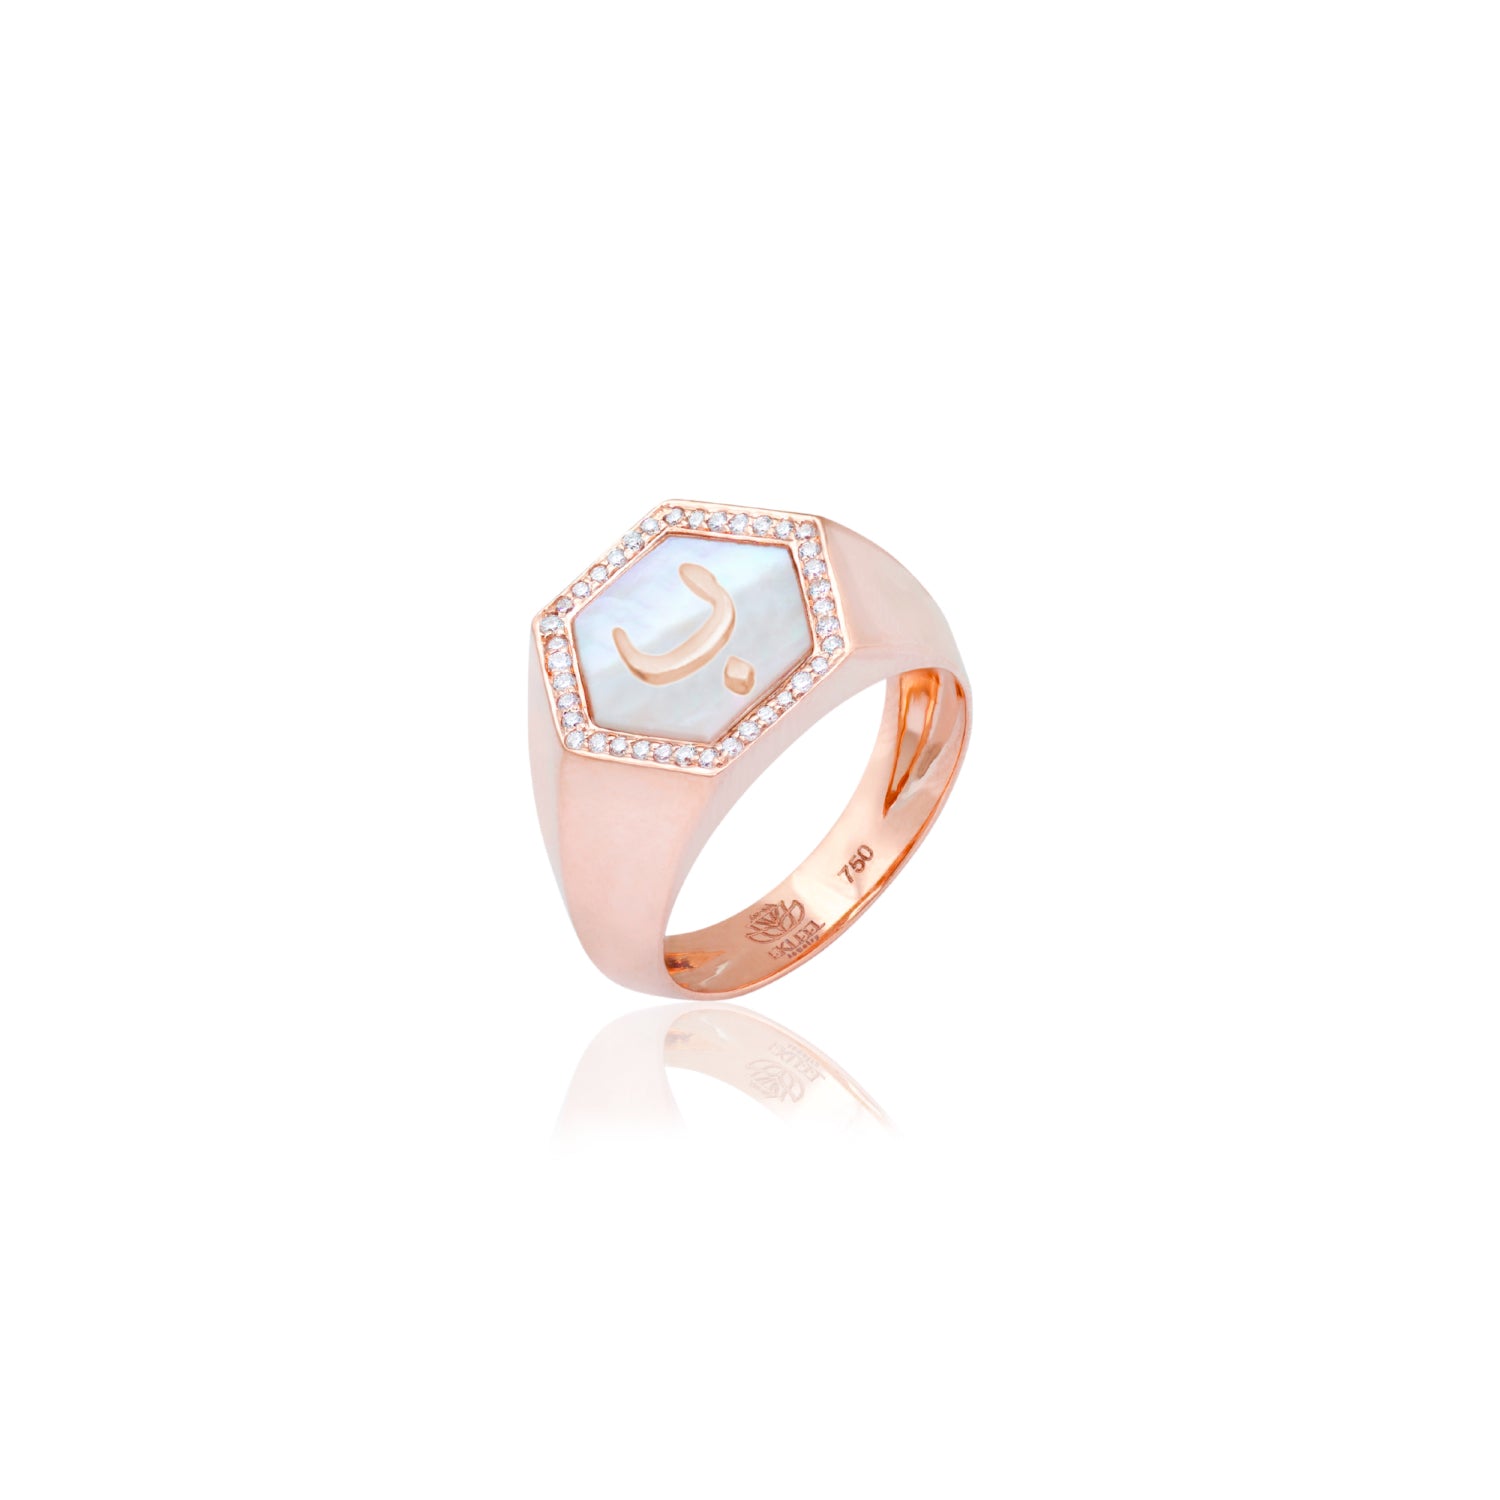 Qamoos 2.0 Letter ب White Mother of Pearl and Diamond Signet Ring in Rose Gold